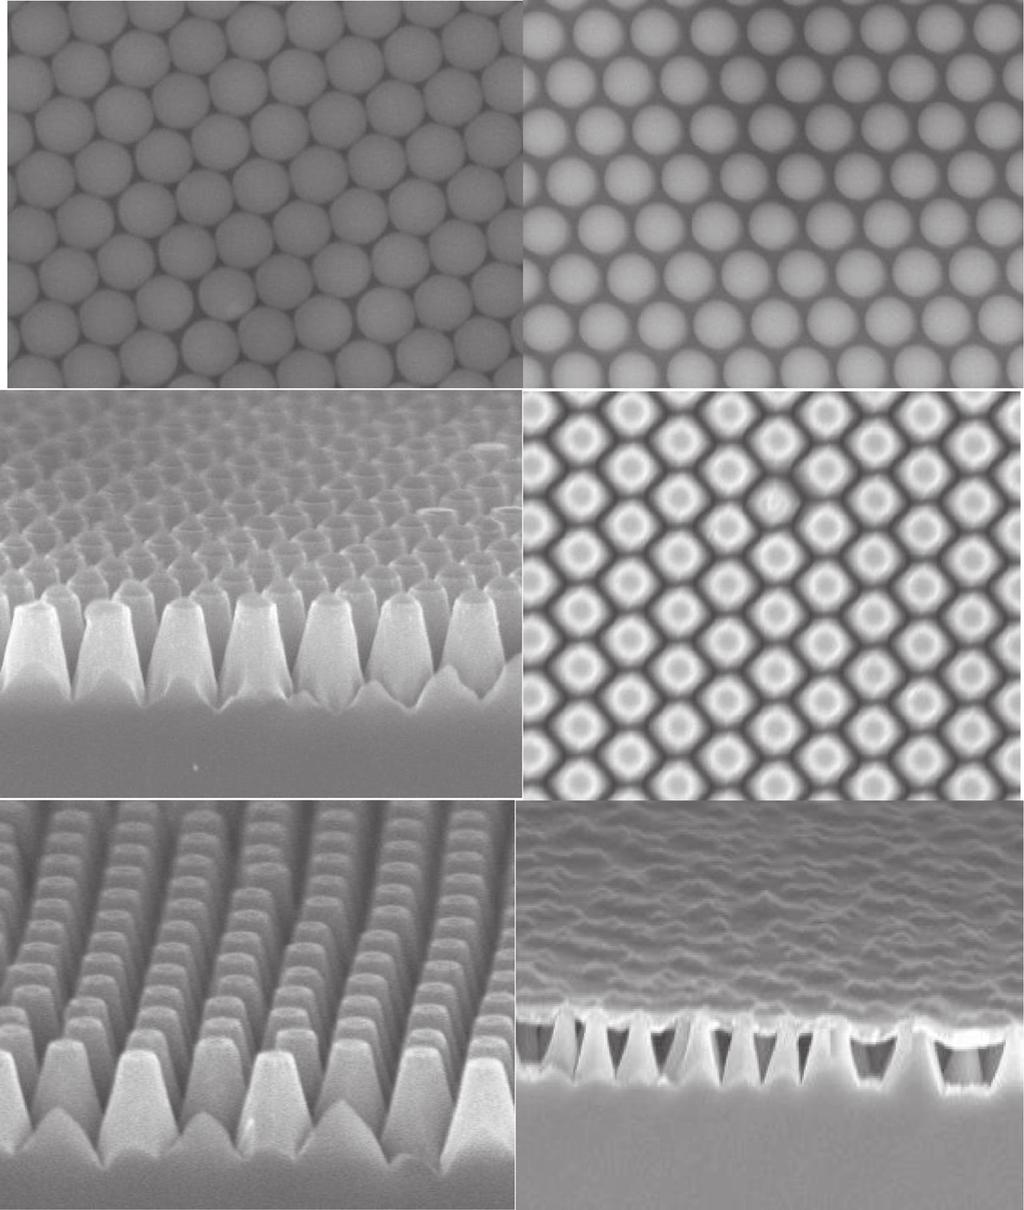 Wang et al. Nanoscale Research Letters (2015) 10:191 Page 3 of 8 of the Si substrate to complete the hybrid solar cell structure (Figure 1f).